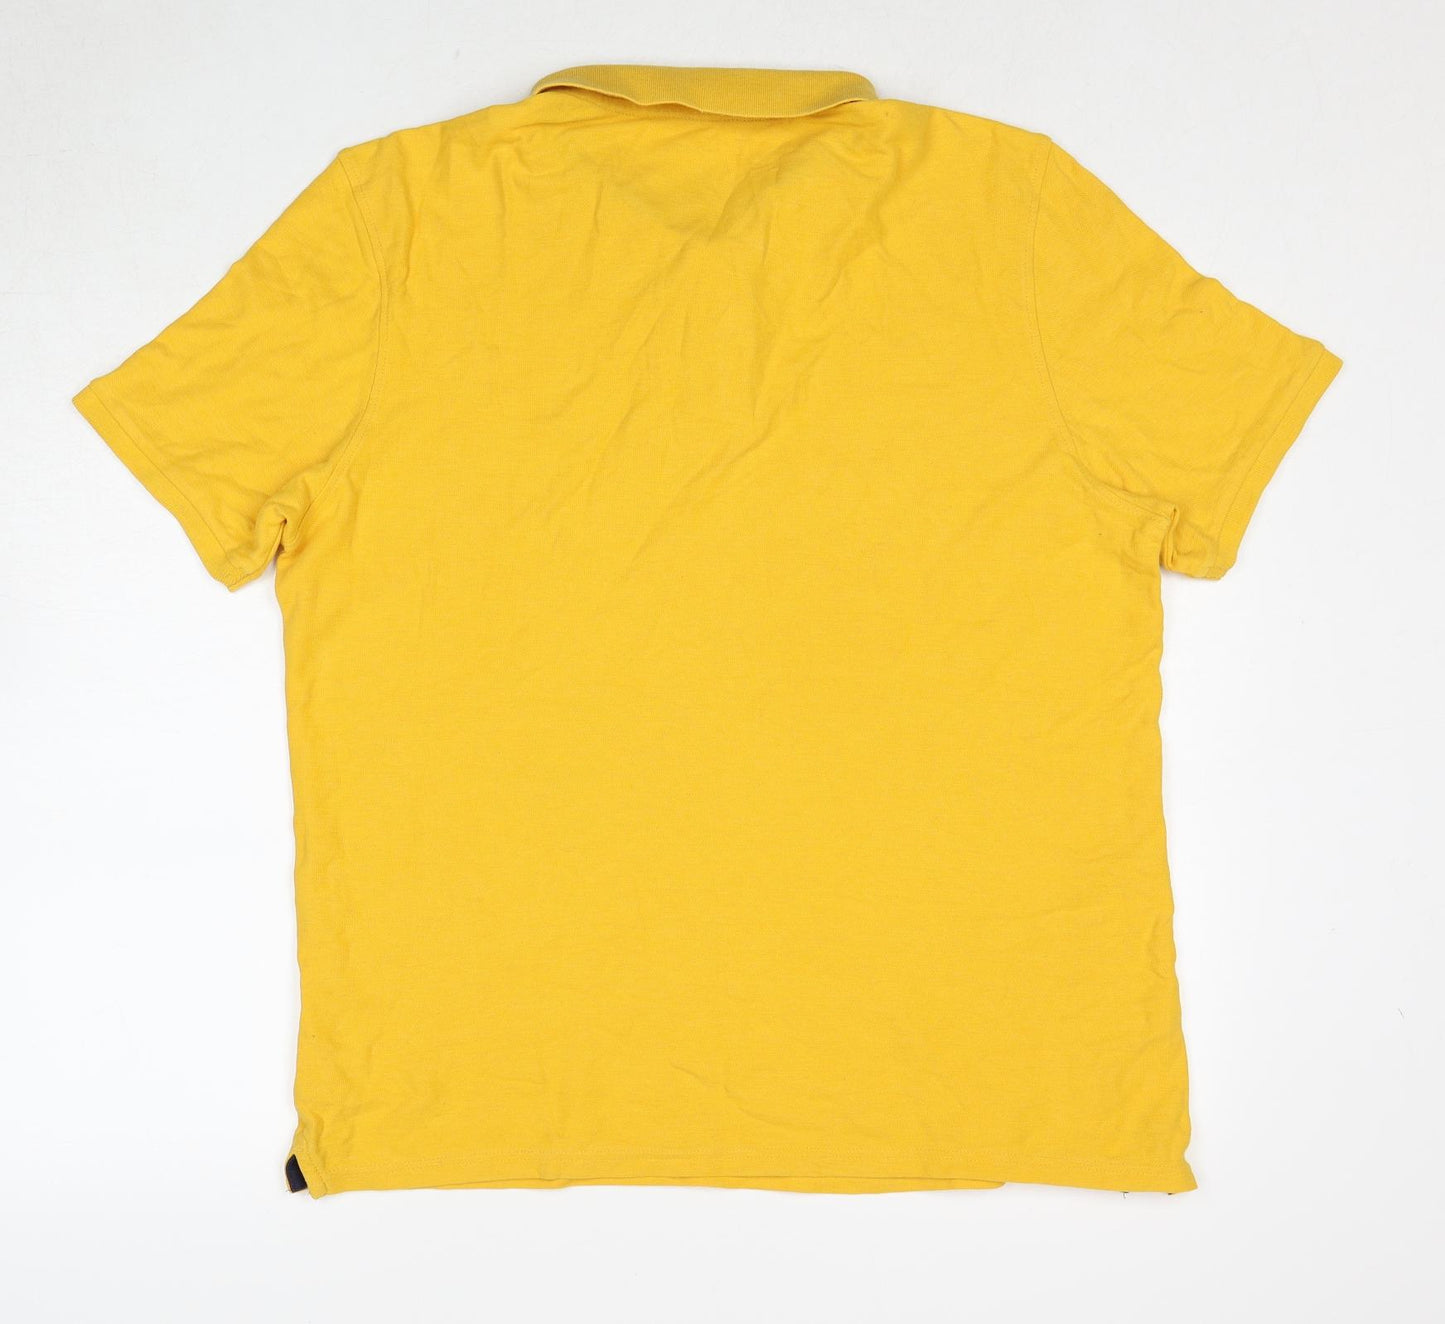 Marks and Spencer Mens Yellow Cotton Polo Size XL Collared Pullover